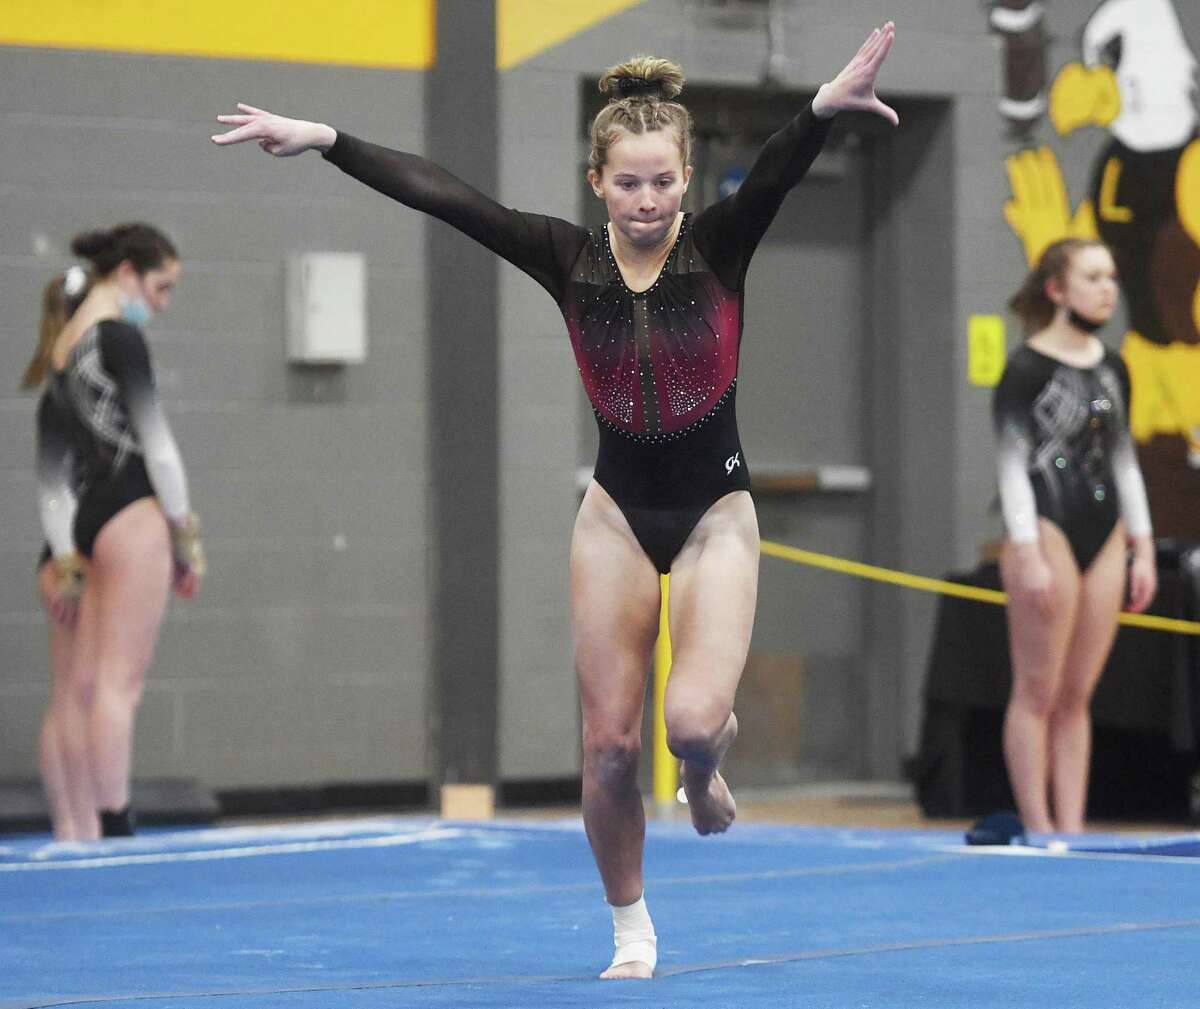 Fairfield Warde's Caroline Garrett competes in the floor exercise at the Class M gymnastics championships at Jonathan Law High School in Milford, Conn. on Saturday, February 26, 2022.